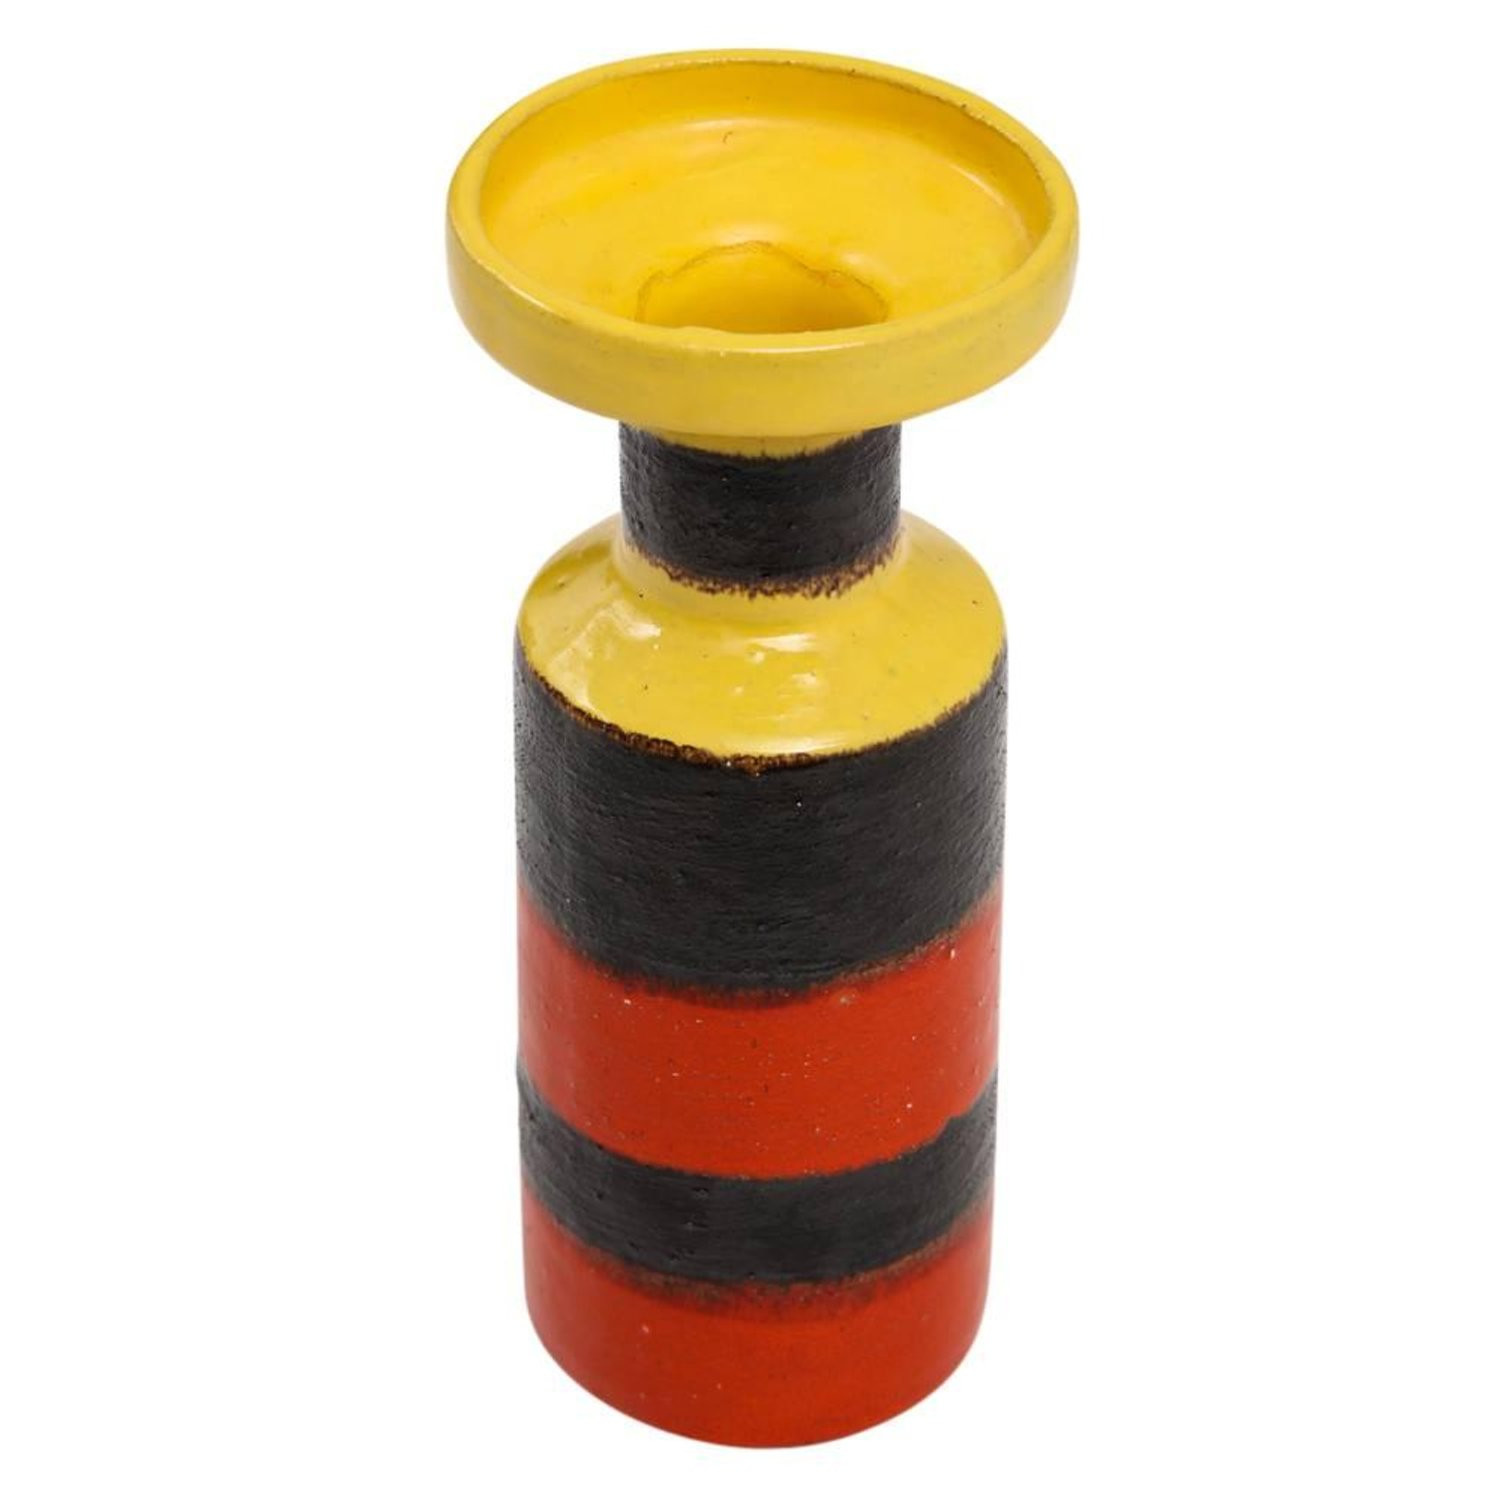 26 Perfect Outdoor Ceramic Vase Fountain 2022 free download outdoor ceramic vase fountain of bitossi ceramic vase pottery stripes yellow red black signed italy with regard to bitossi ceramic vase pottery stripes yellow red black signed italy 1960s fo